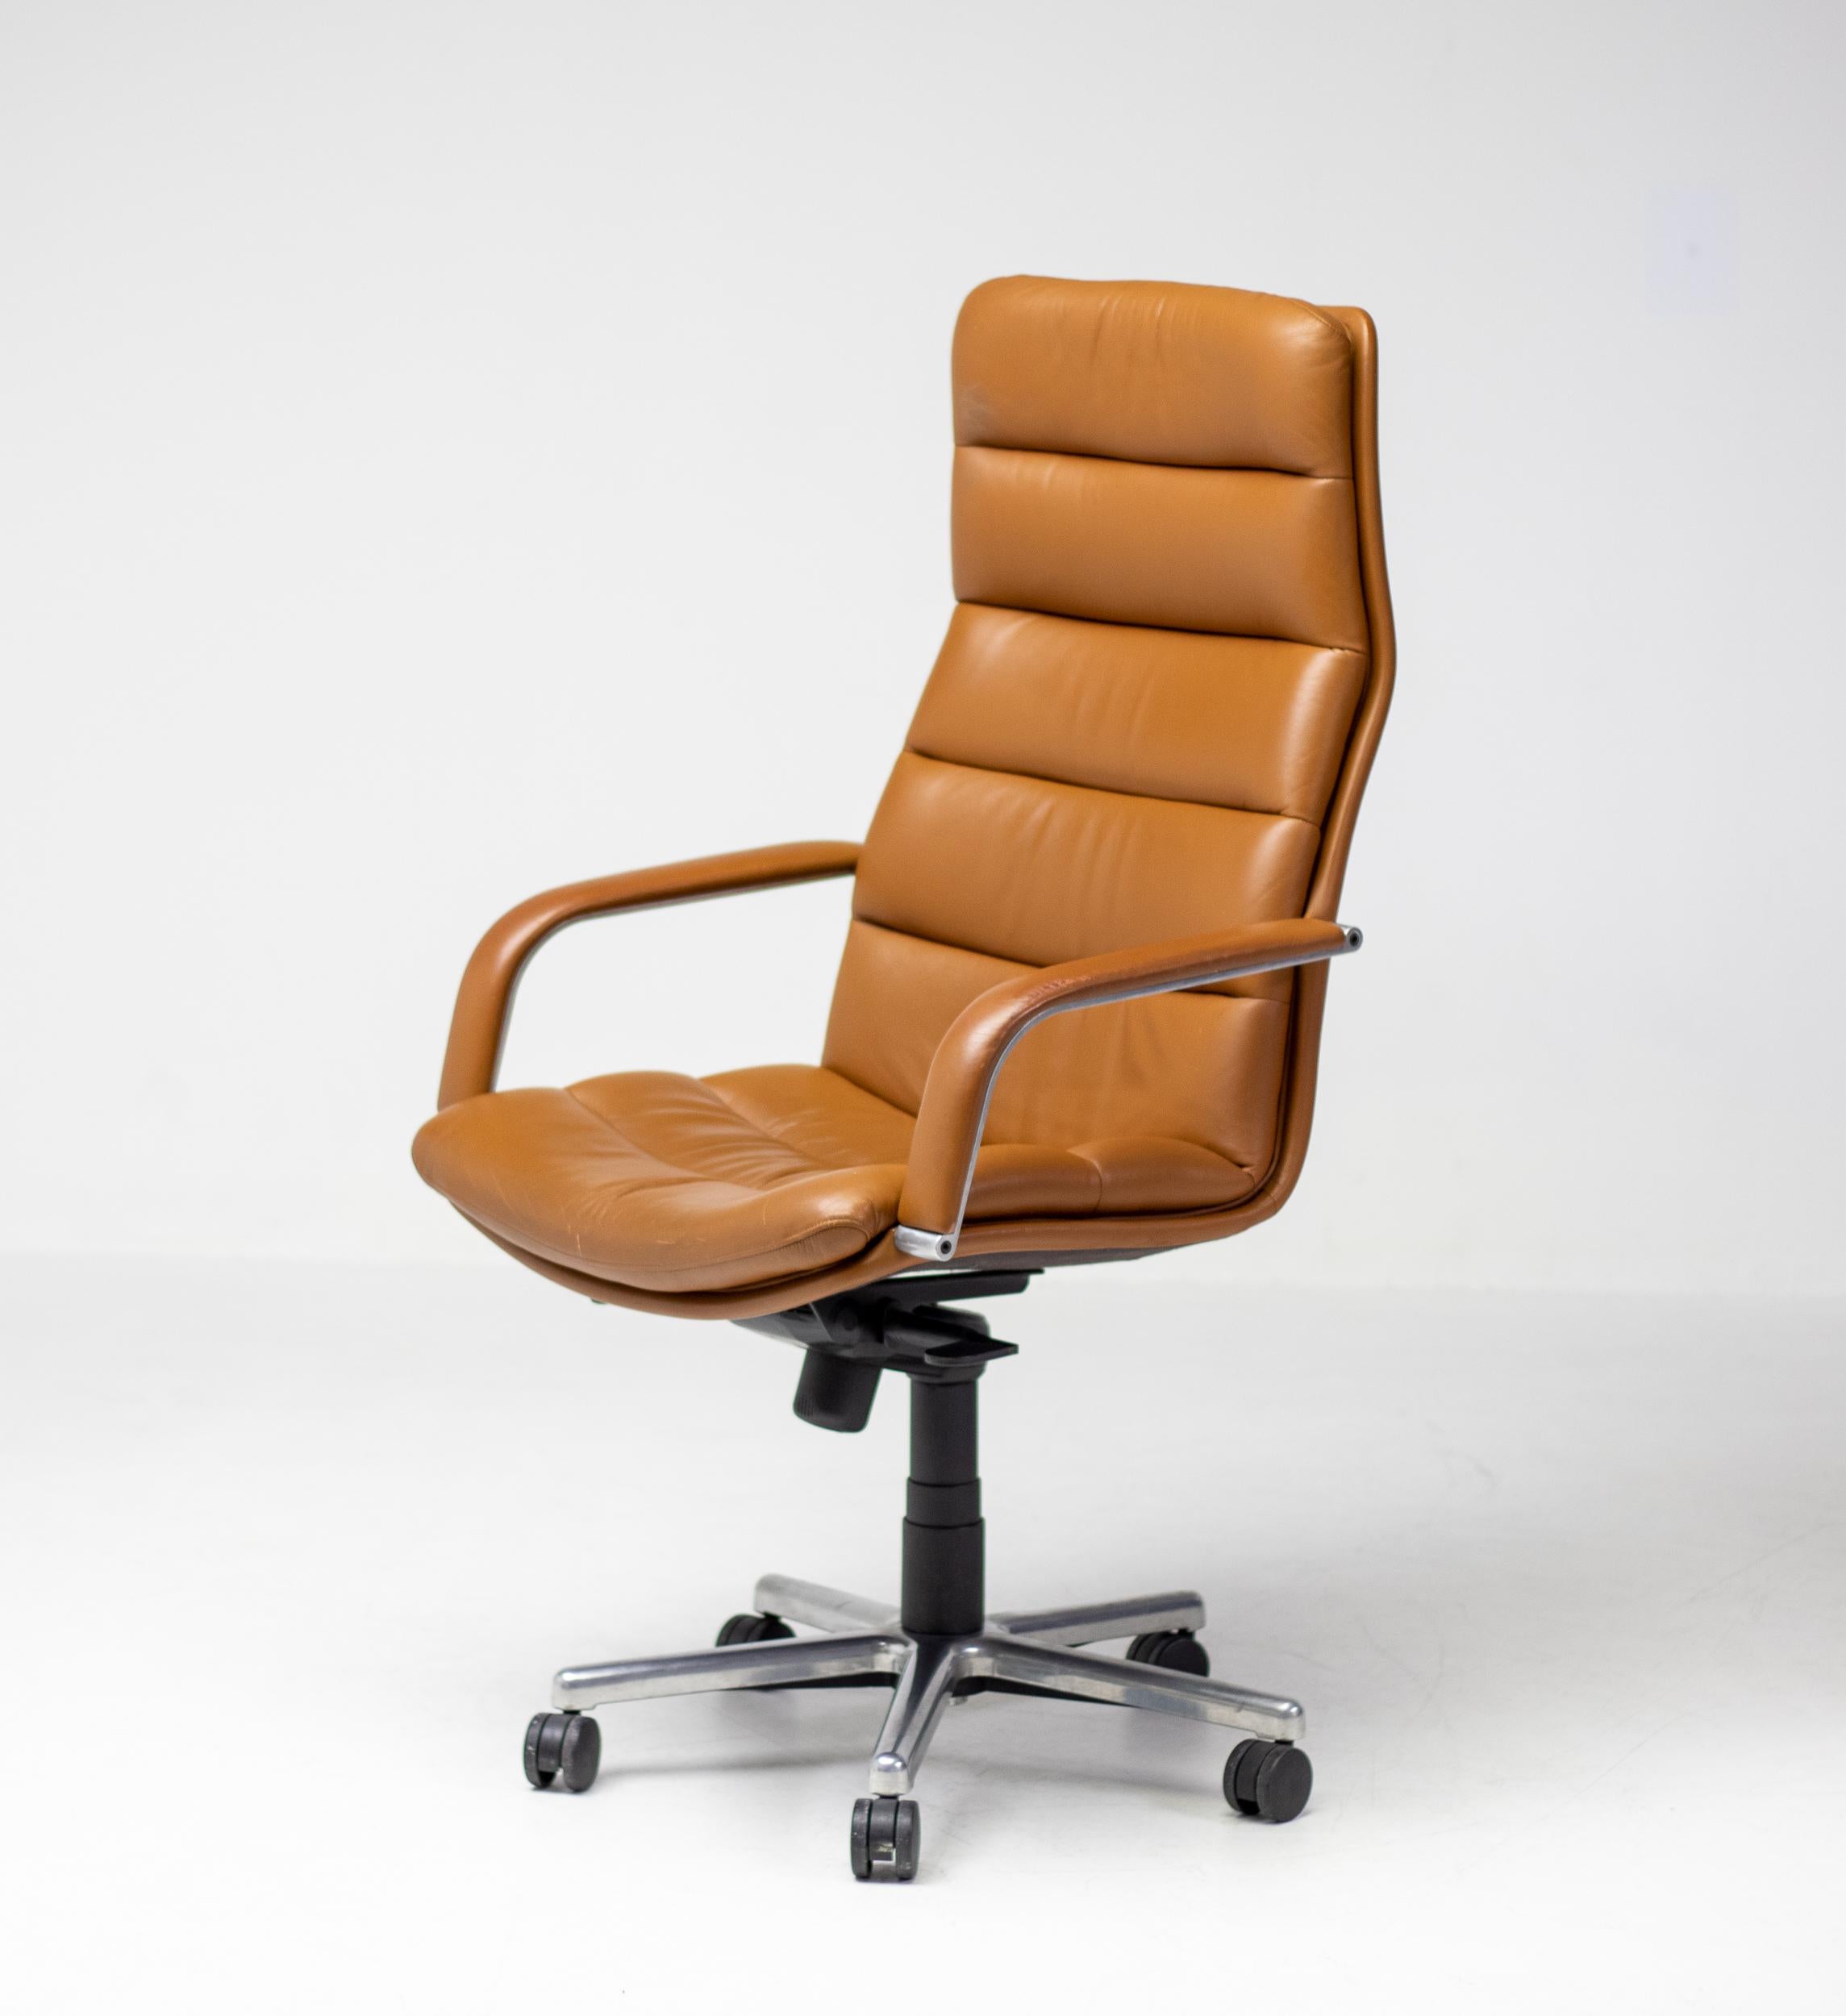 Geoffrey Harcourt for Artifort tilt/swivel desk chairs in aluminum and leather, The Netherlands, 1970s.
These executive chairs where designed by Geoffrey Harcourt and manufactured by Artifort in the seventies. 
Very comfortable desk chairs in